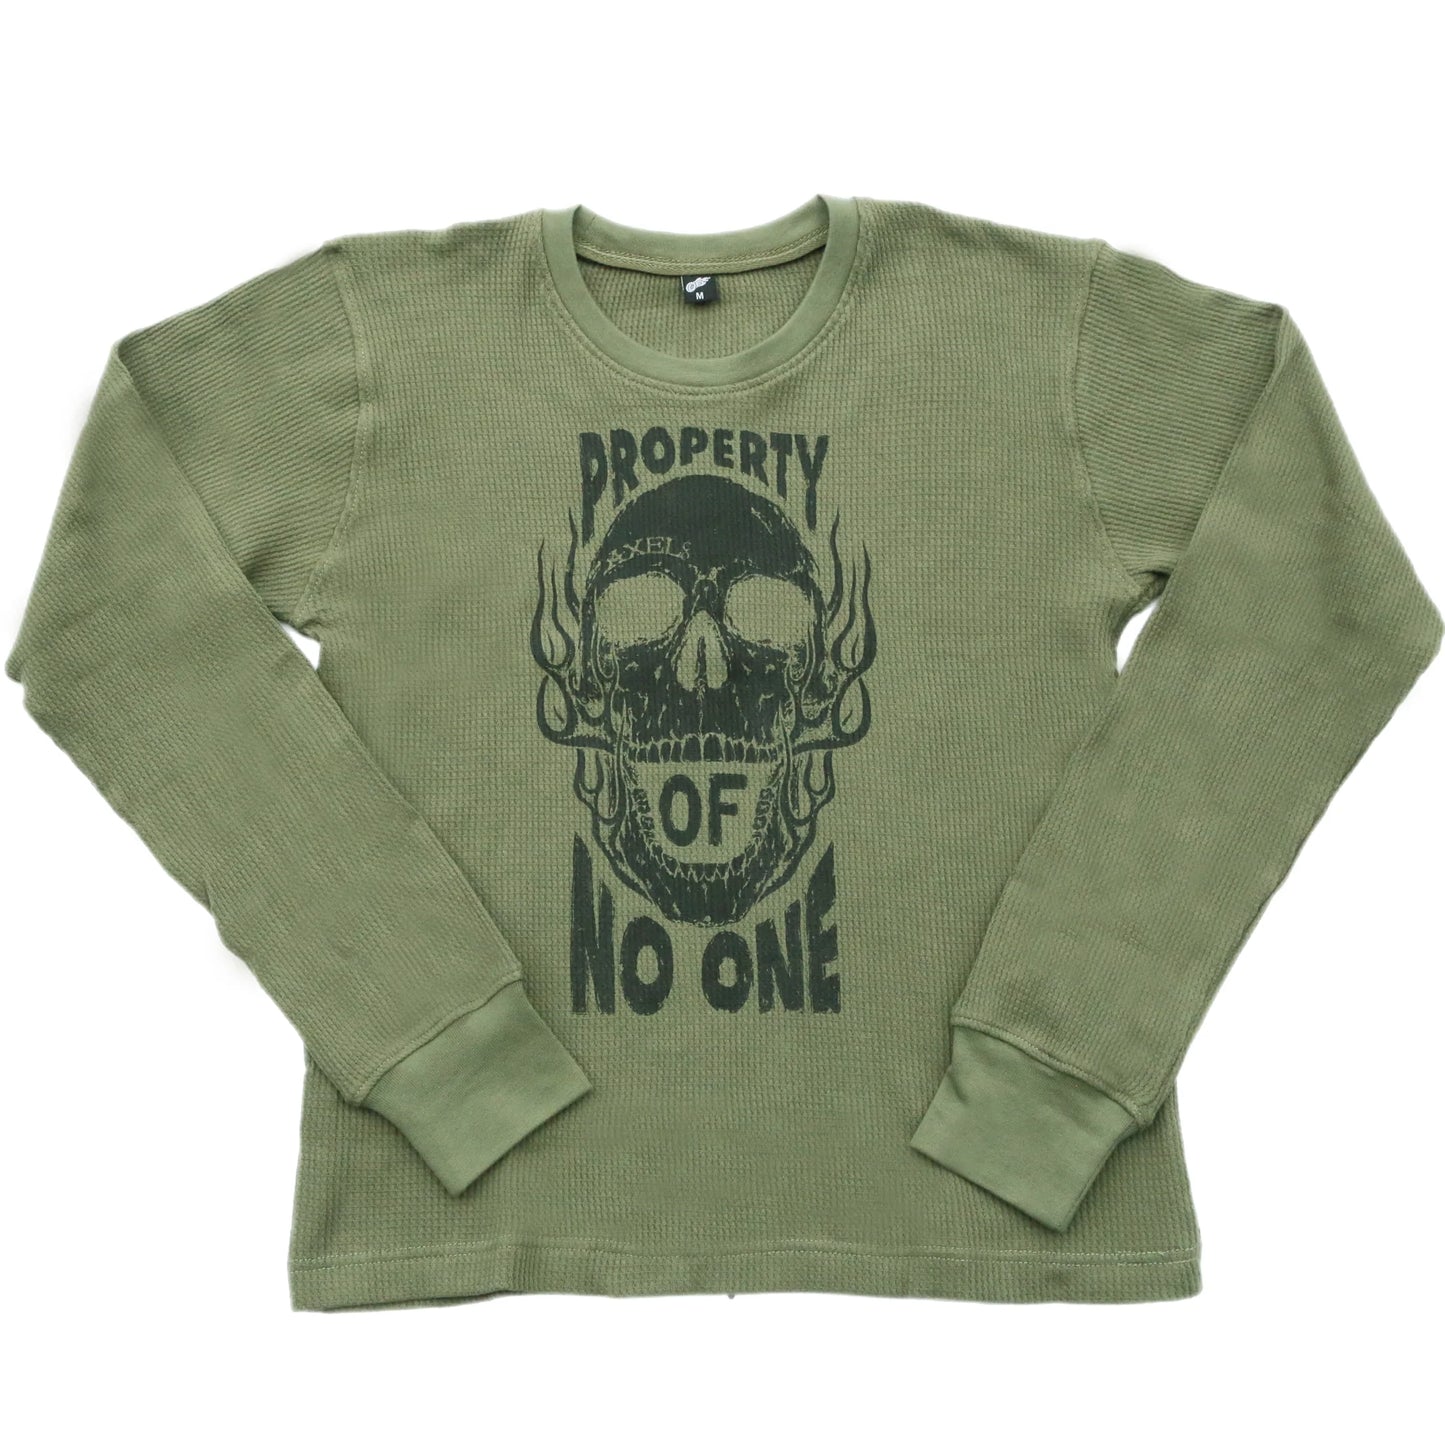 Axel Co "Property Of No One" Motorcycle Thermal